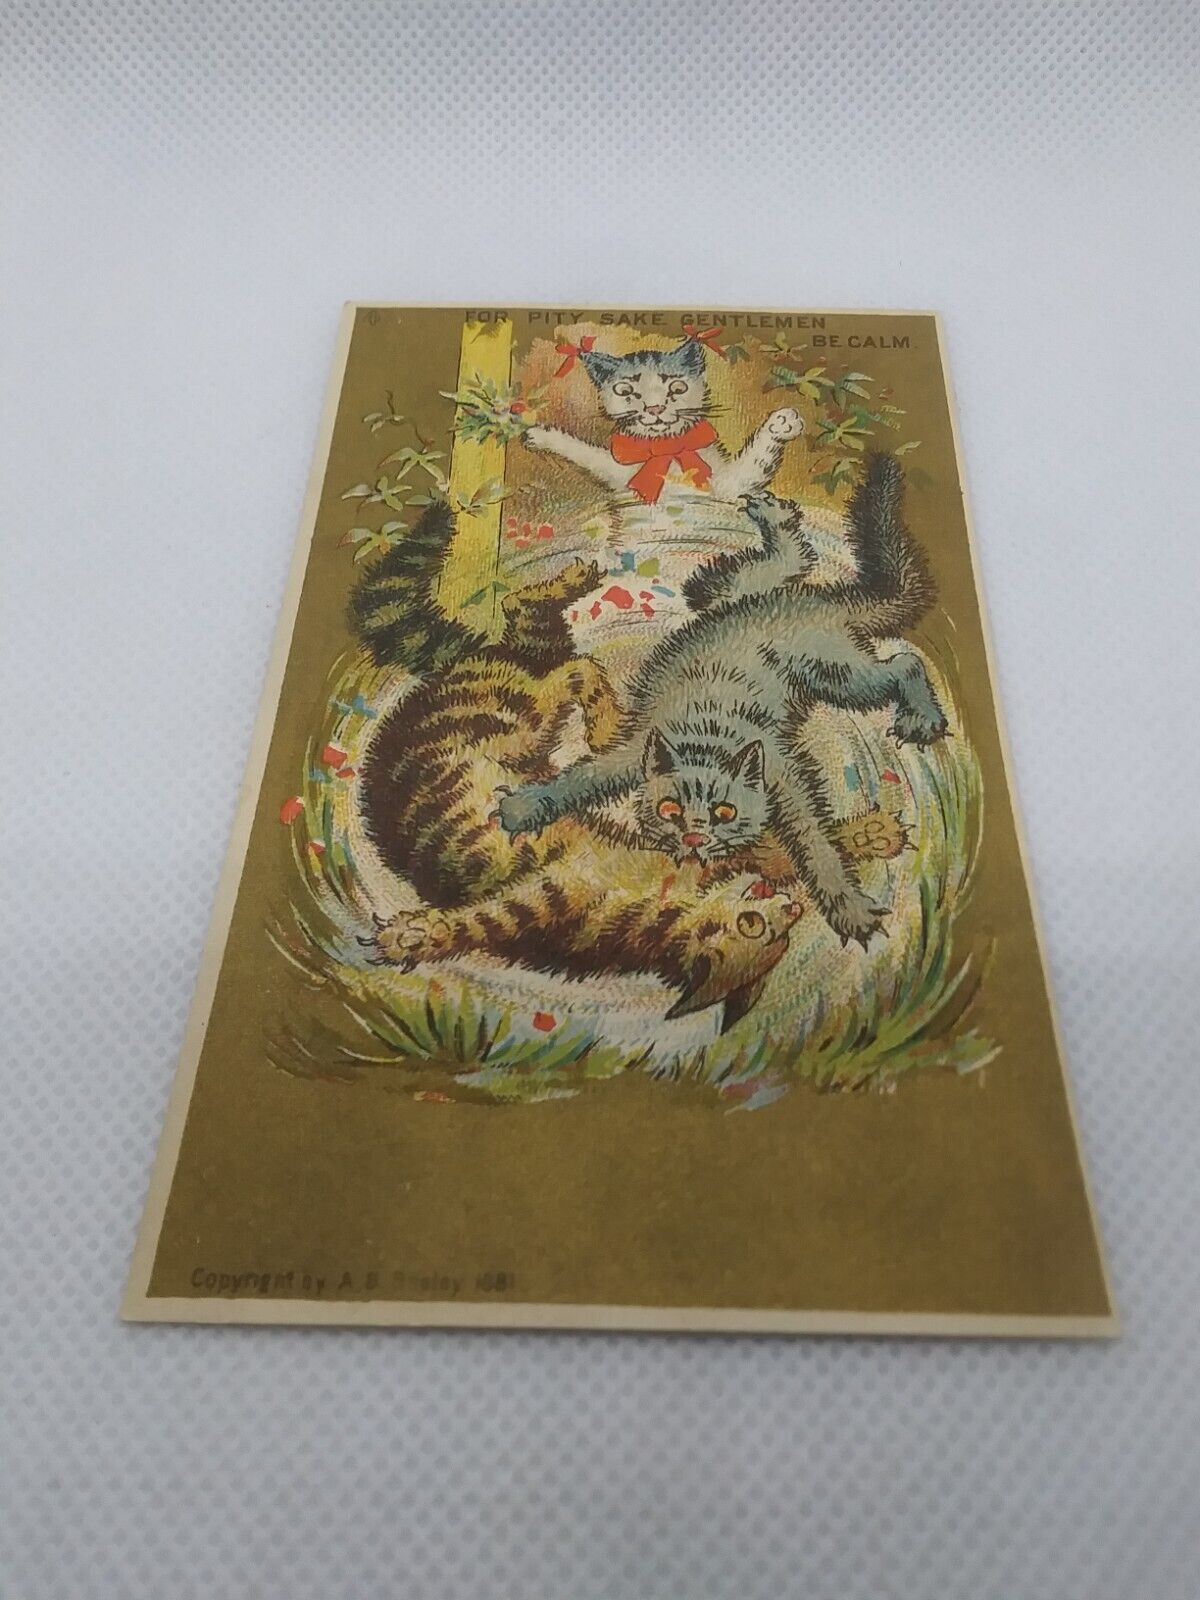 Antique 1881 For Pity Sake Gentlemen Be Calm Cats Fighting Trade Card